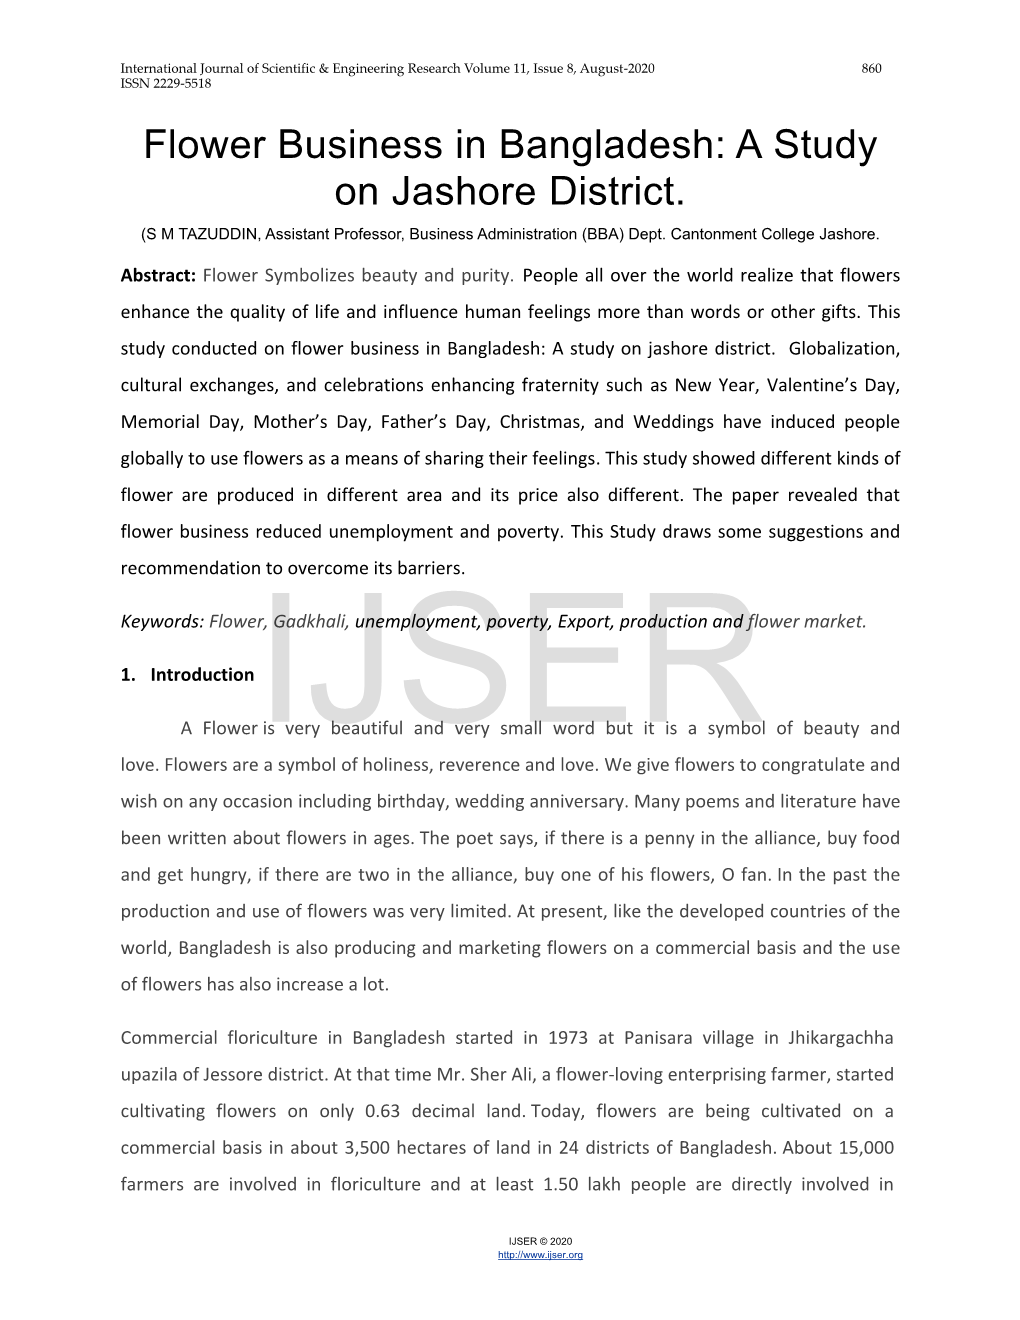 Flower Business in Bangladesh: a Study on Jashore District